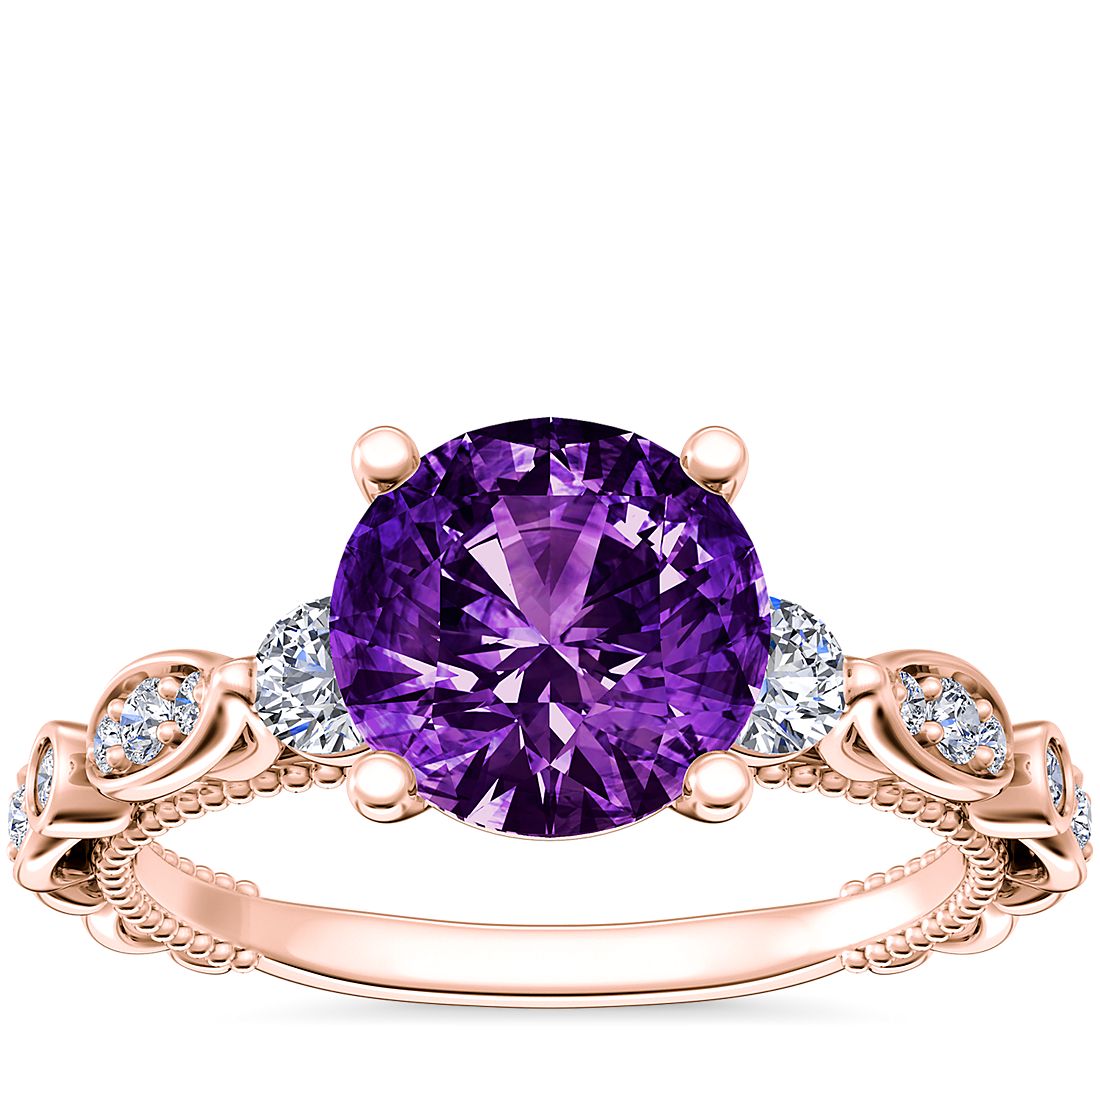 Floral Ellipse Diamond Cathedral Engagement Ring with Round Amethyst in 14k Rose Gold (8mm)